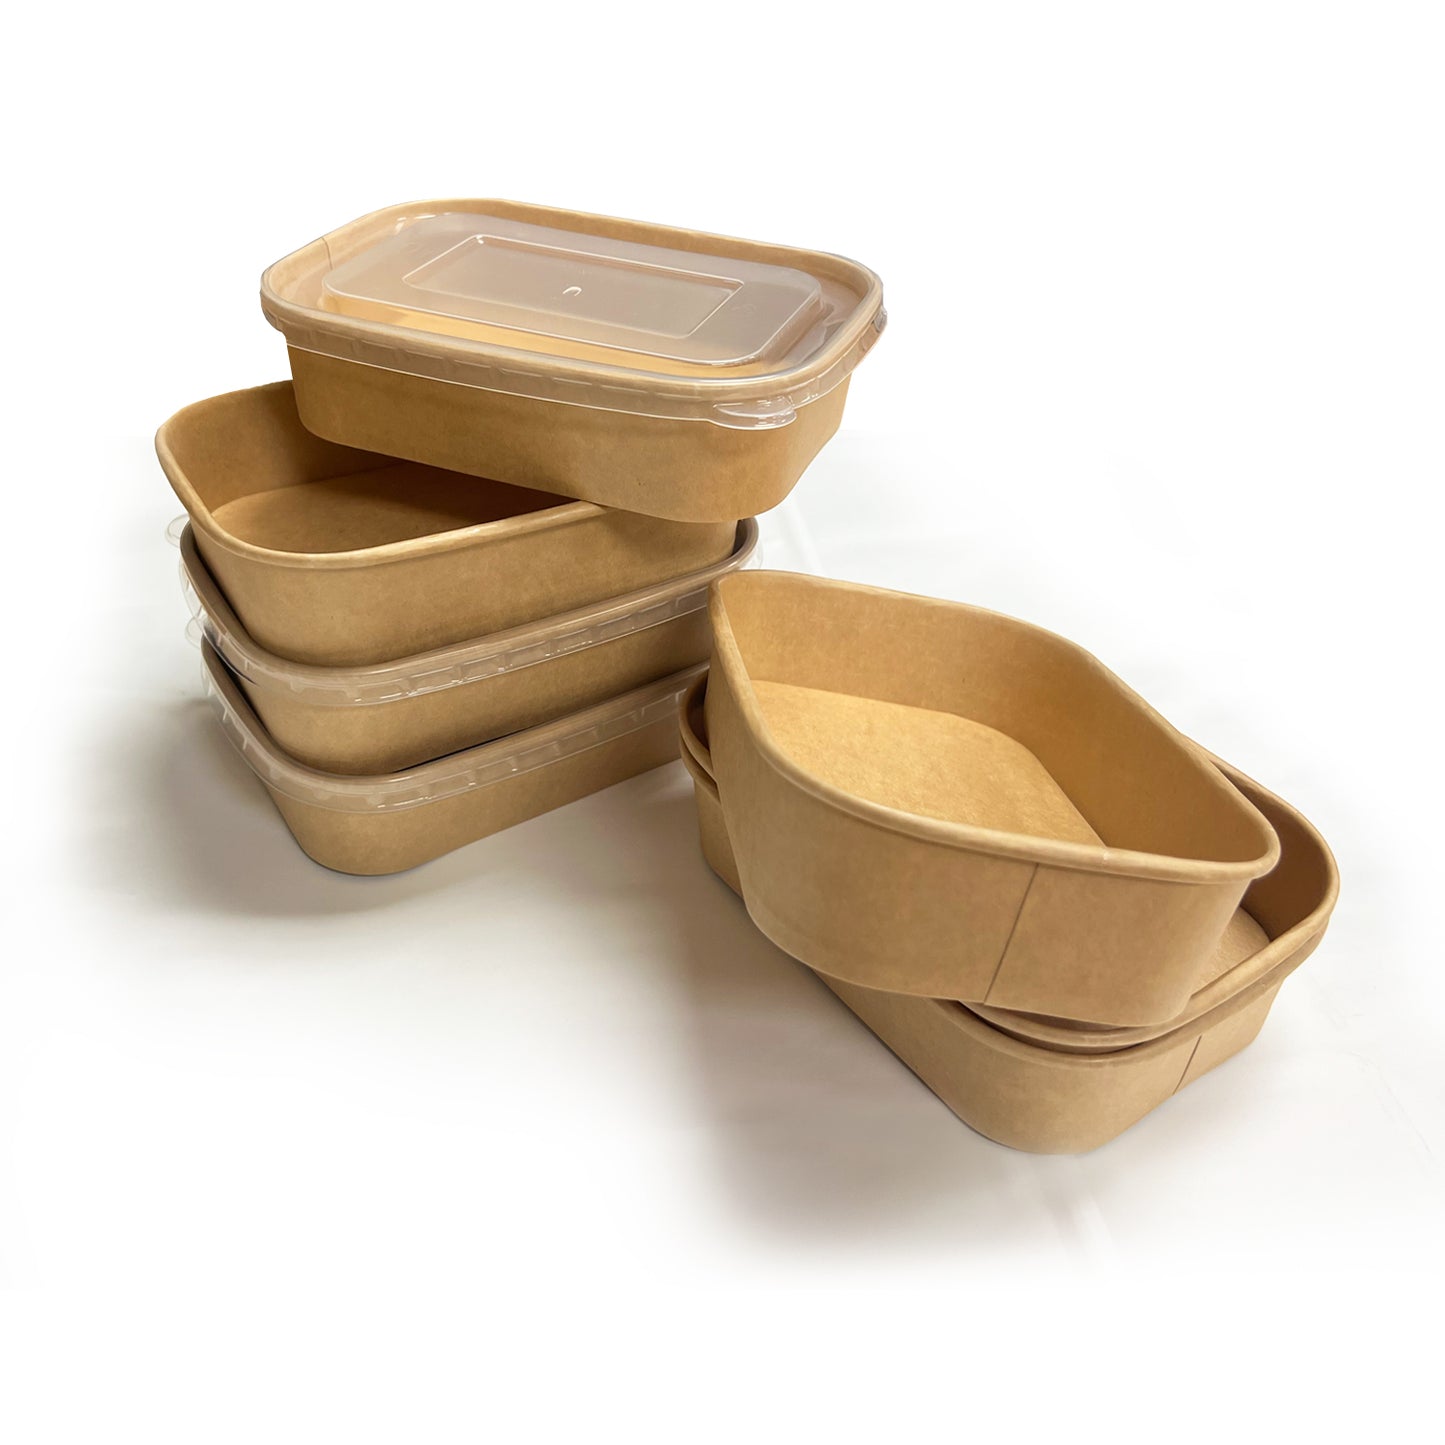 KIS-PL475 | PP Lids for 17oz-34oz Kraft Paper Rectangle Containers; From $0.12/pc